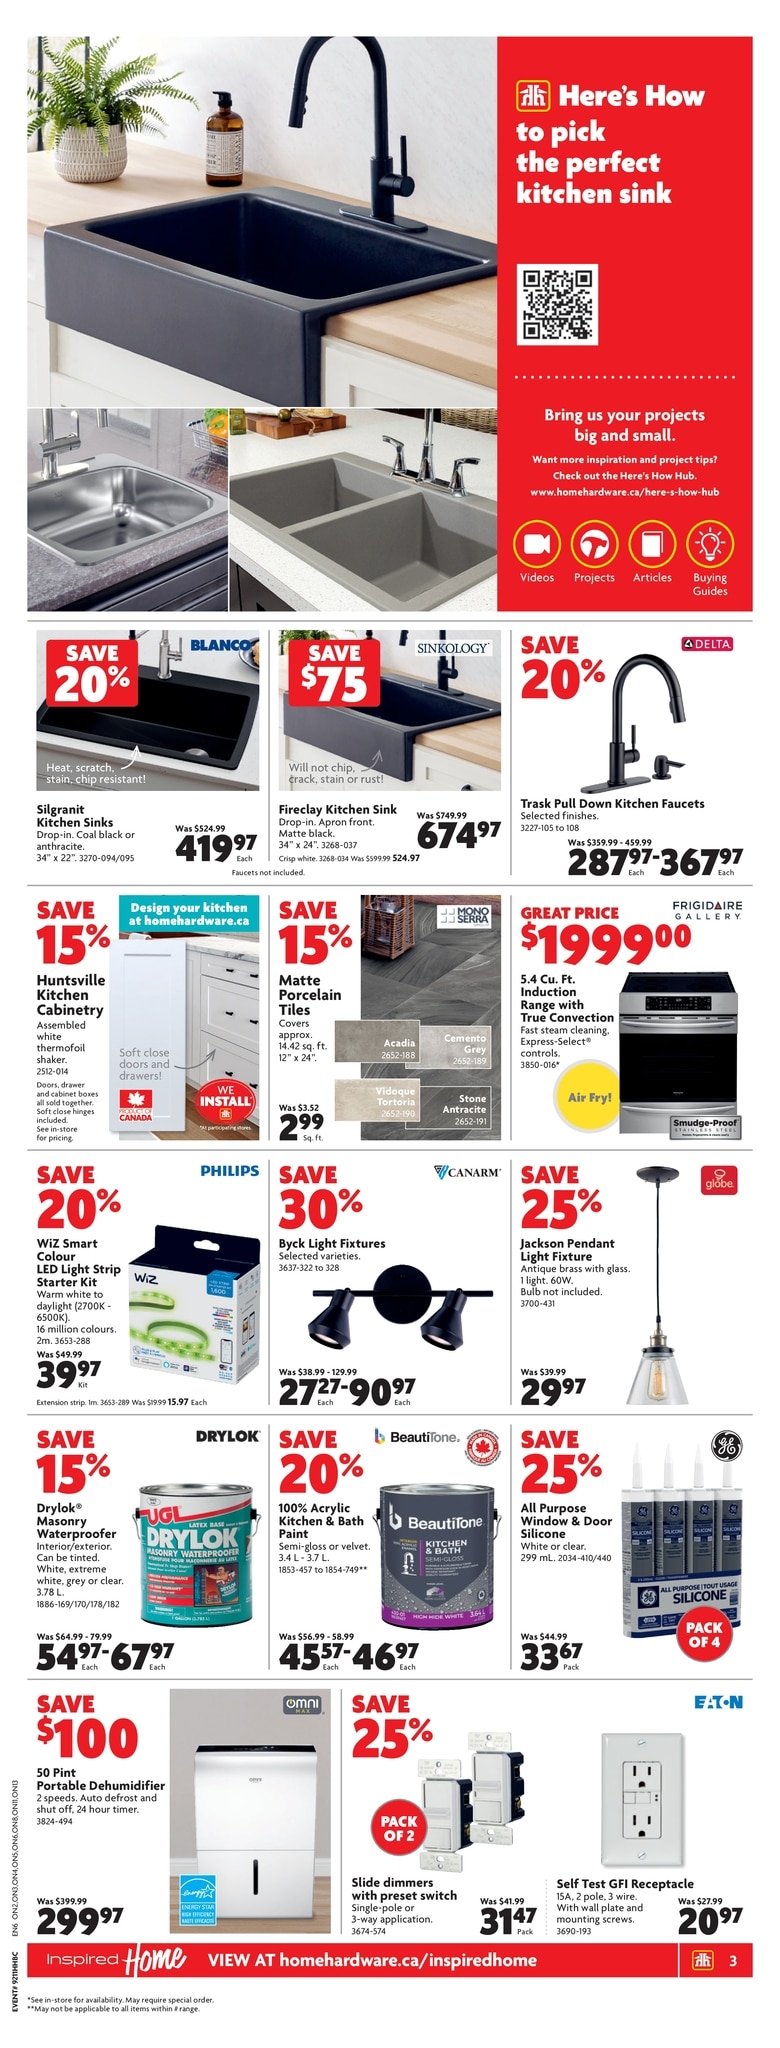 Home Hardware - Building Centre - Page 4